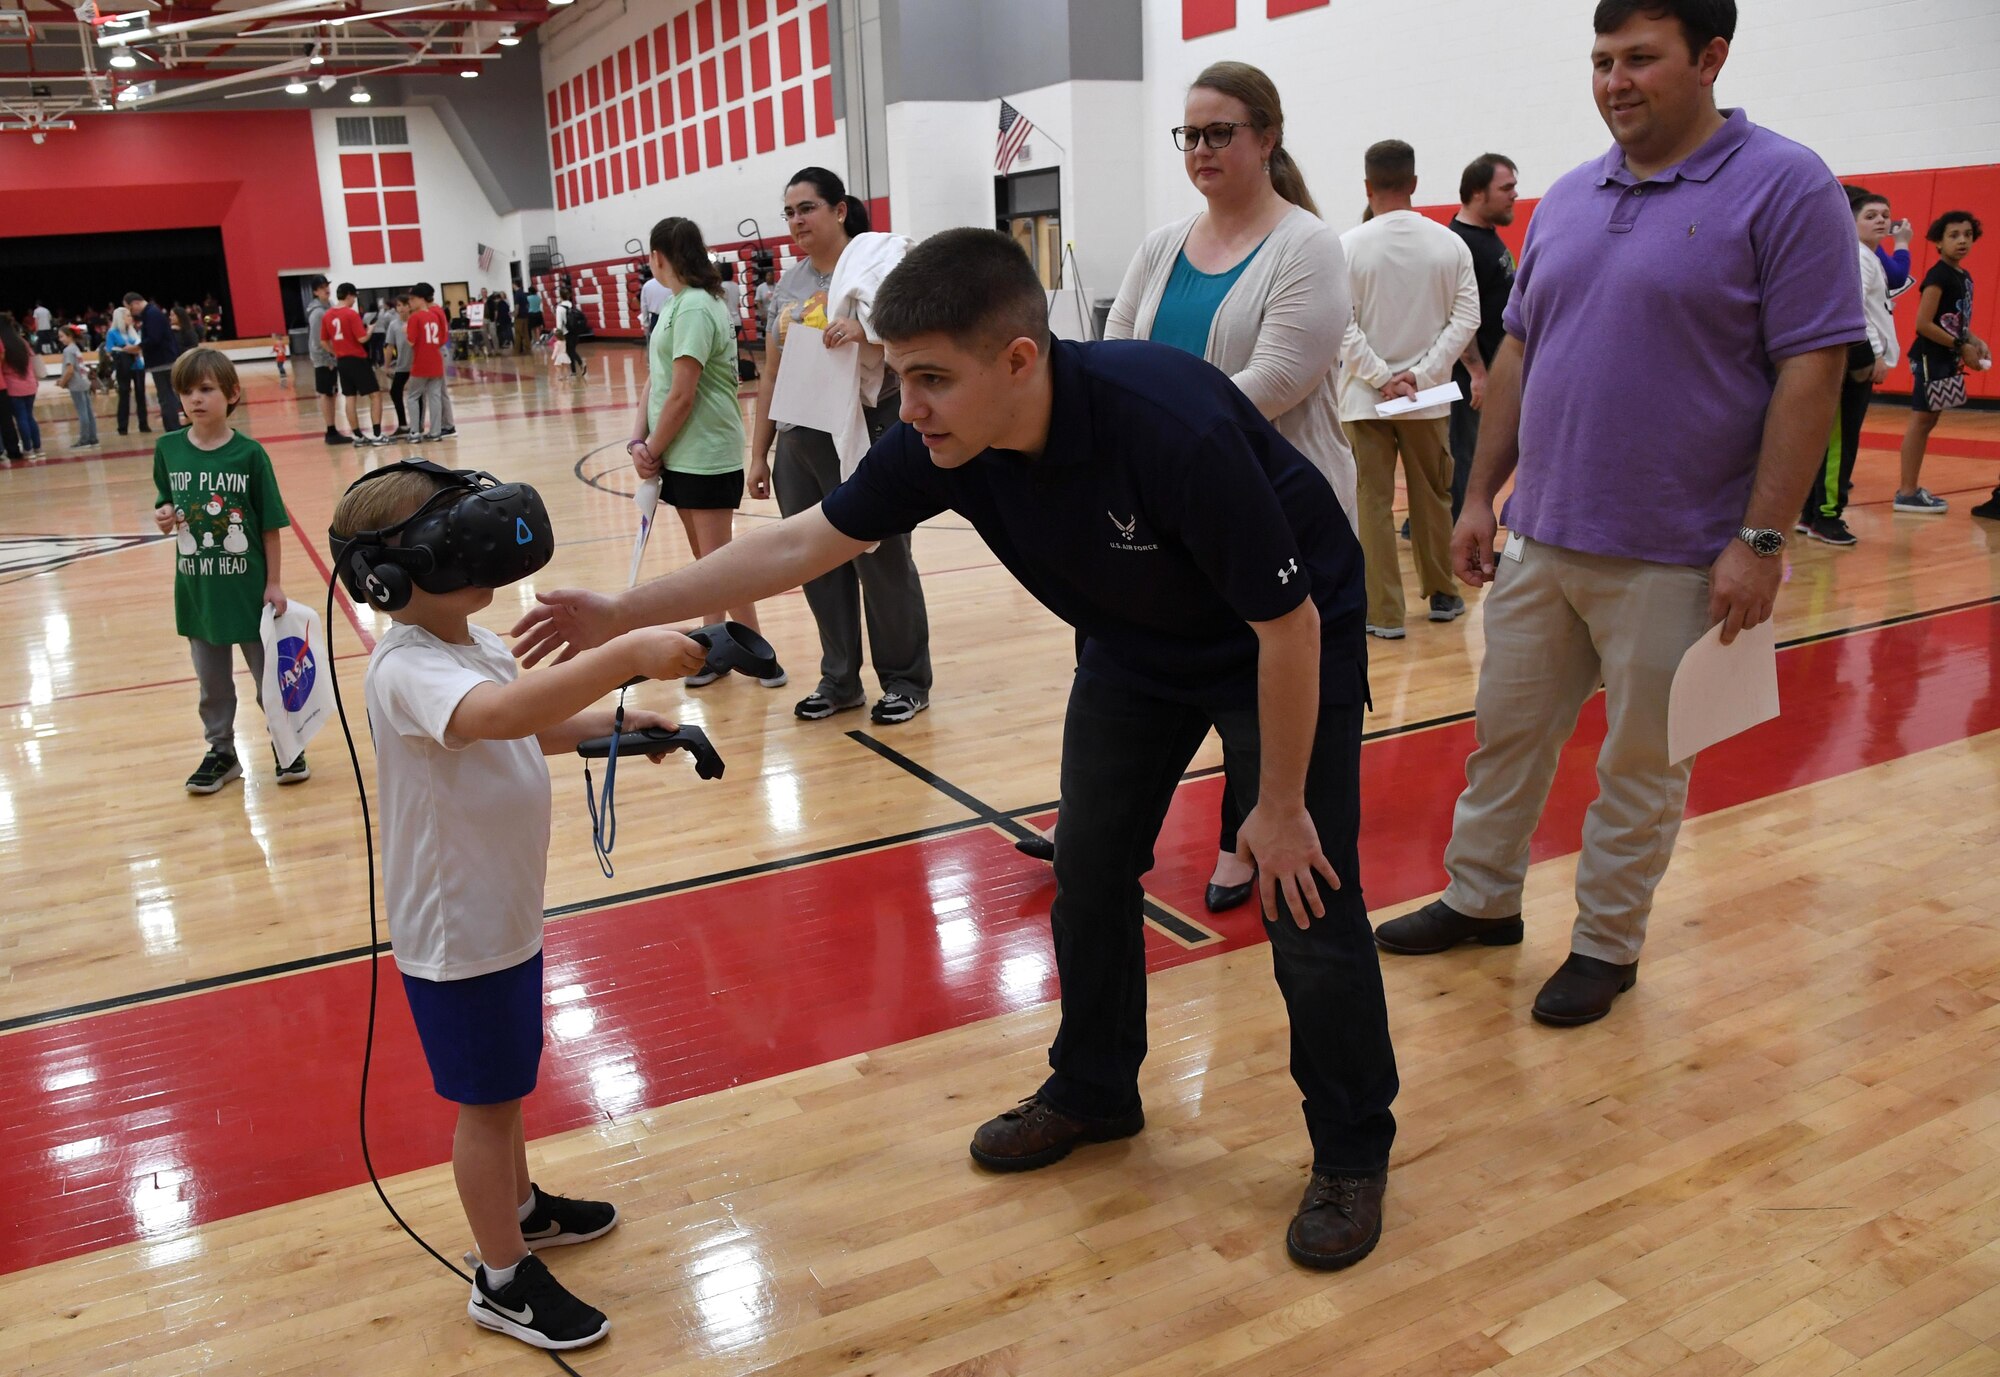 U.S. Air Force Staff Sgt. Brandon McCool, 81st Training Support Squadron interactive multimedia supervisor, provides Jack Carron, North Bay Elementary School student, with a virtual reality demonstration, during the Biloxi Science, Technology, Engineering and Mathematics Night at the Biloxi Junior High School gymnasium, Biloxi, Mississippi, Feb. 11, 2020. The entire Biloxi school district was invited to the event which promoted STEM. Seven career fields from Keesler's 81st Training Wing and the 81st Training Group participated in the event. (U.S. Air Force photo by Kemberly Groue)